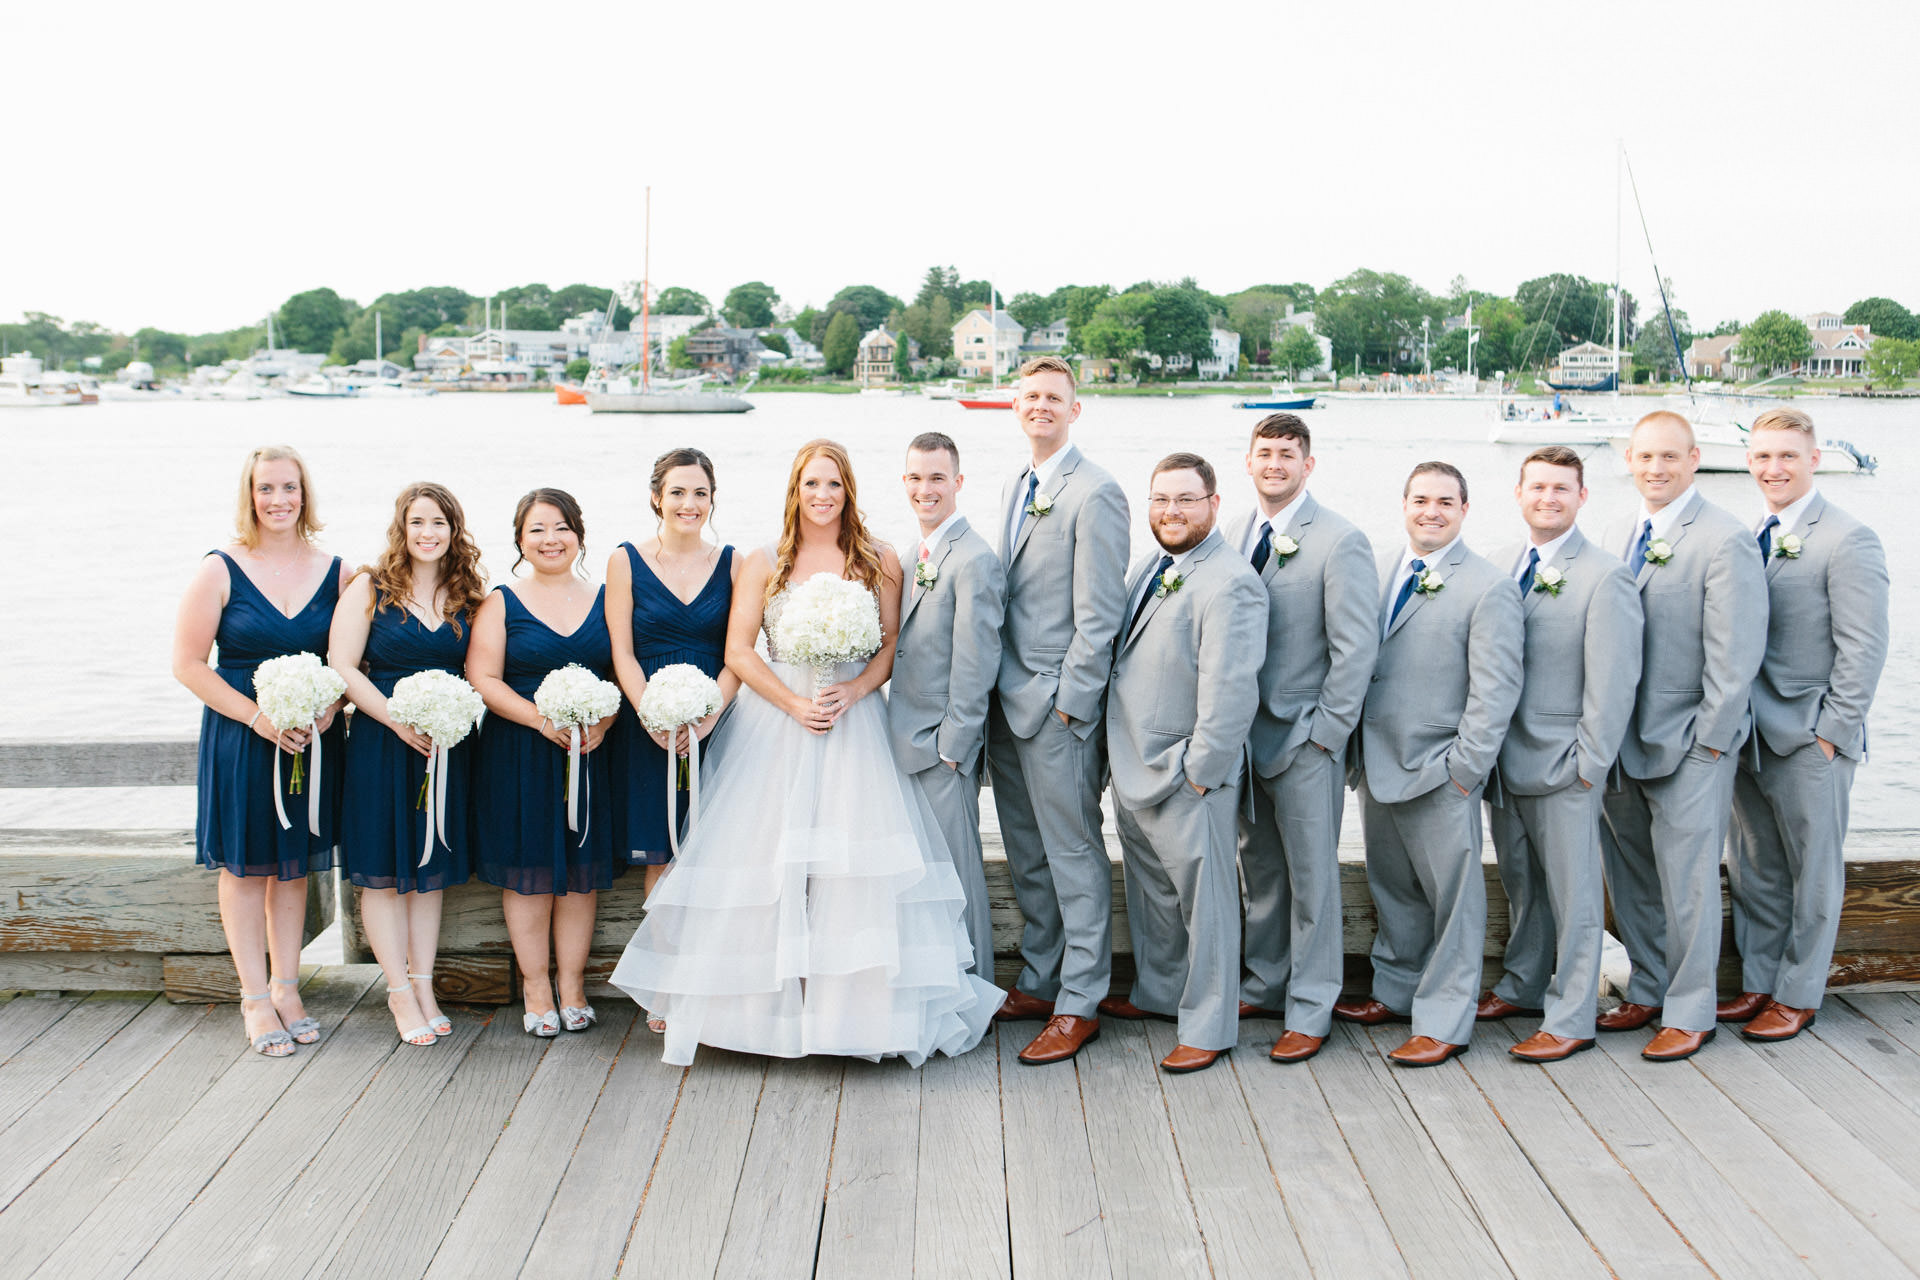 Wedding party posing for a photograph at the Custom House Maritime Museum in Newburyport, MA